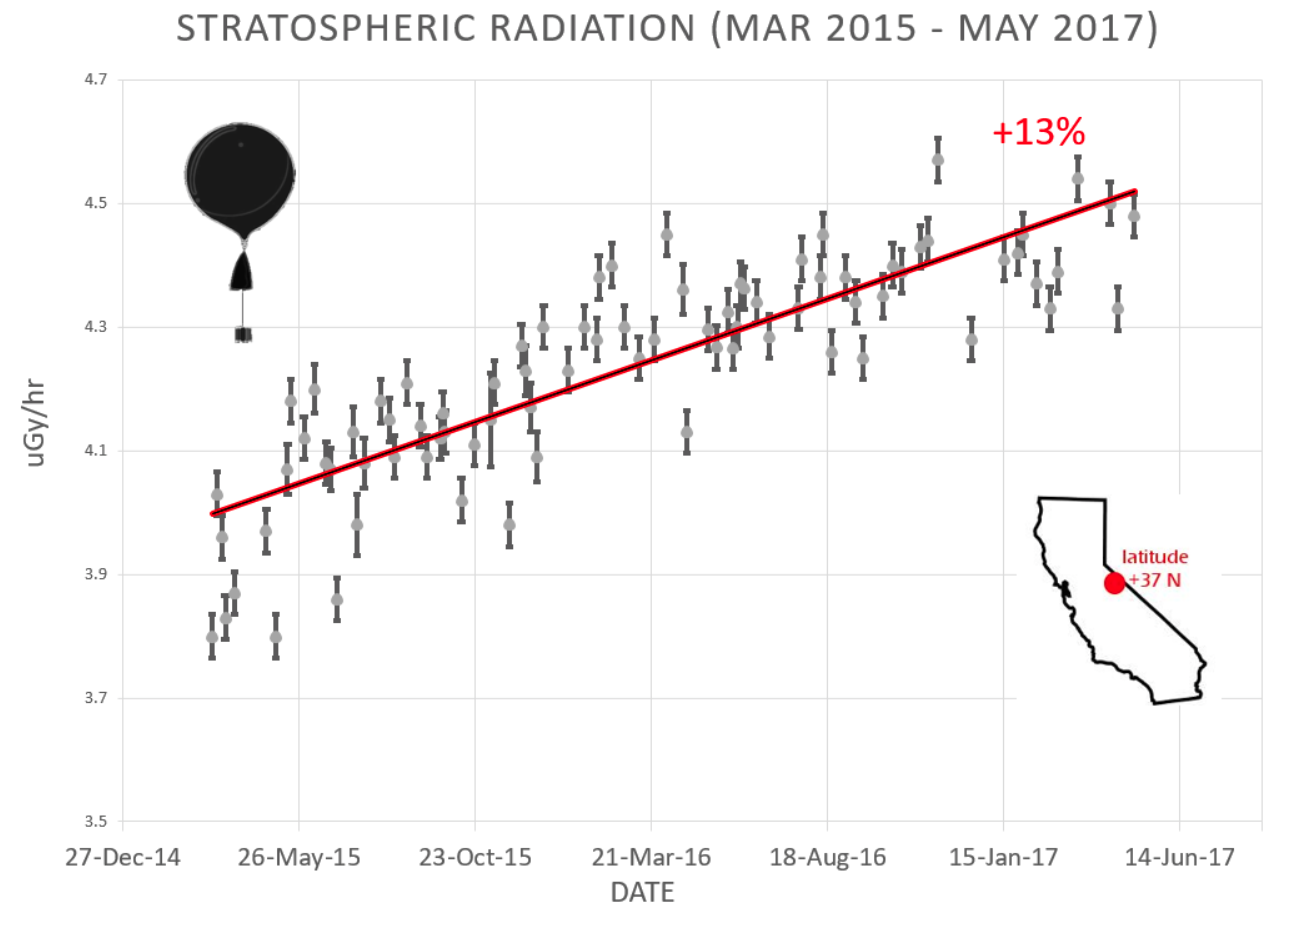 Cosmic ray intensities from March 2015 to May 2017.